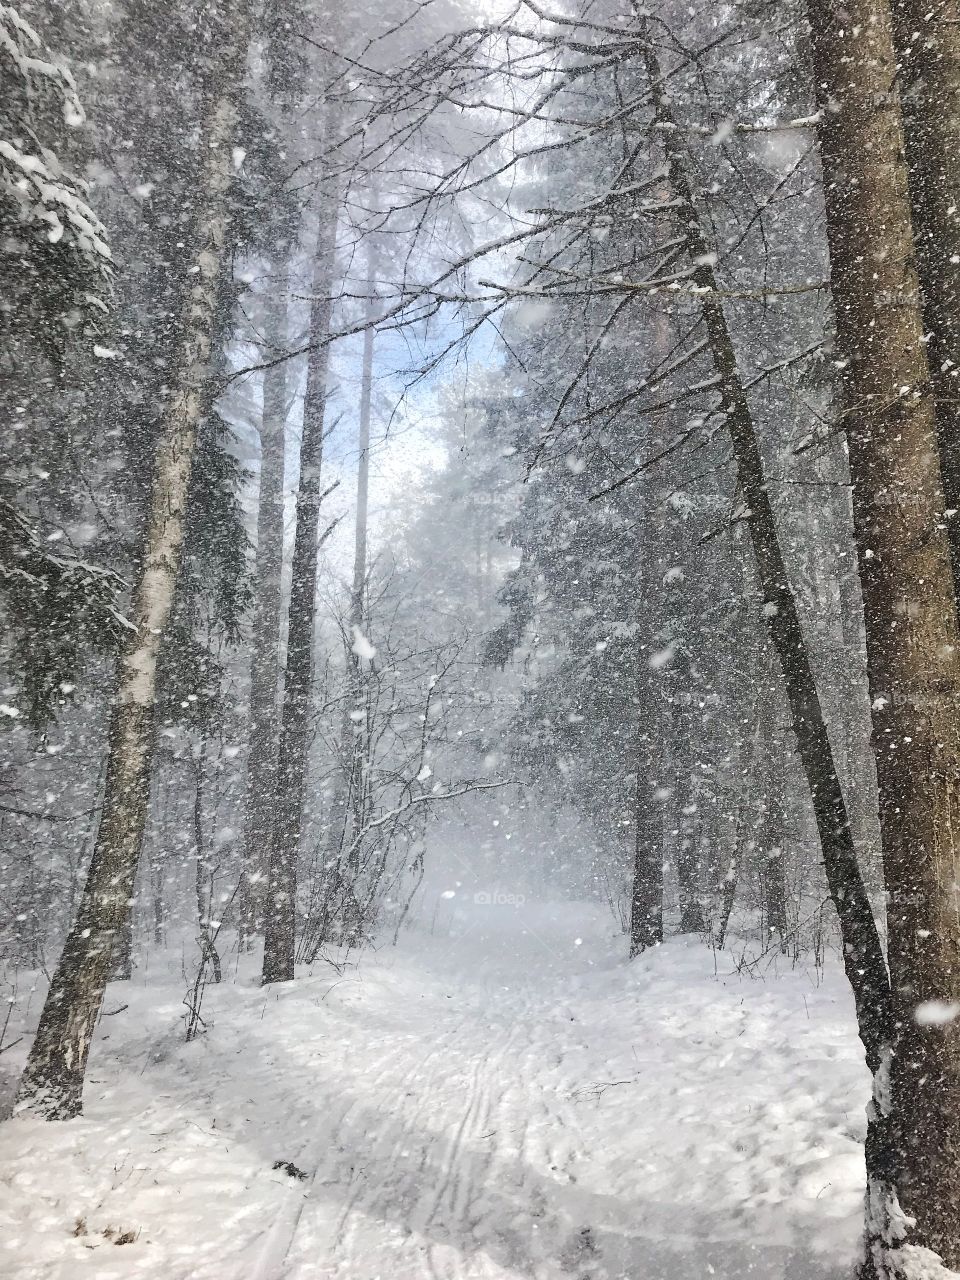 Snowstorm in forest